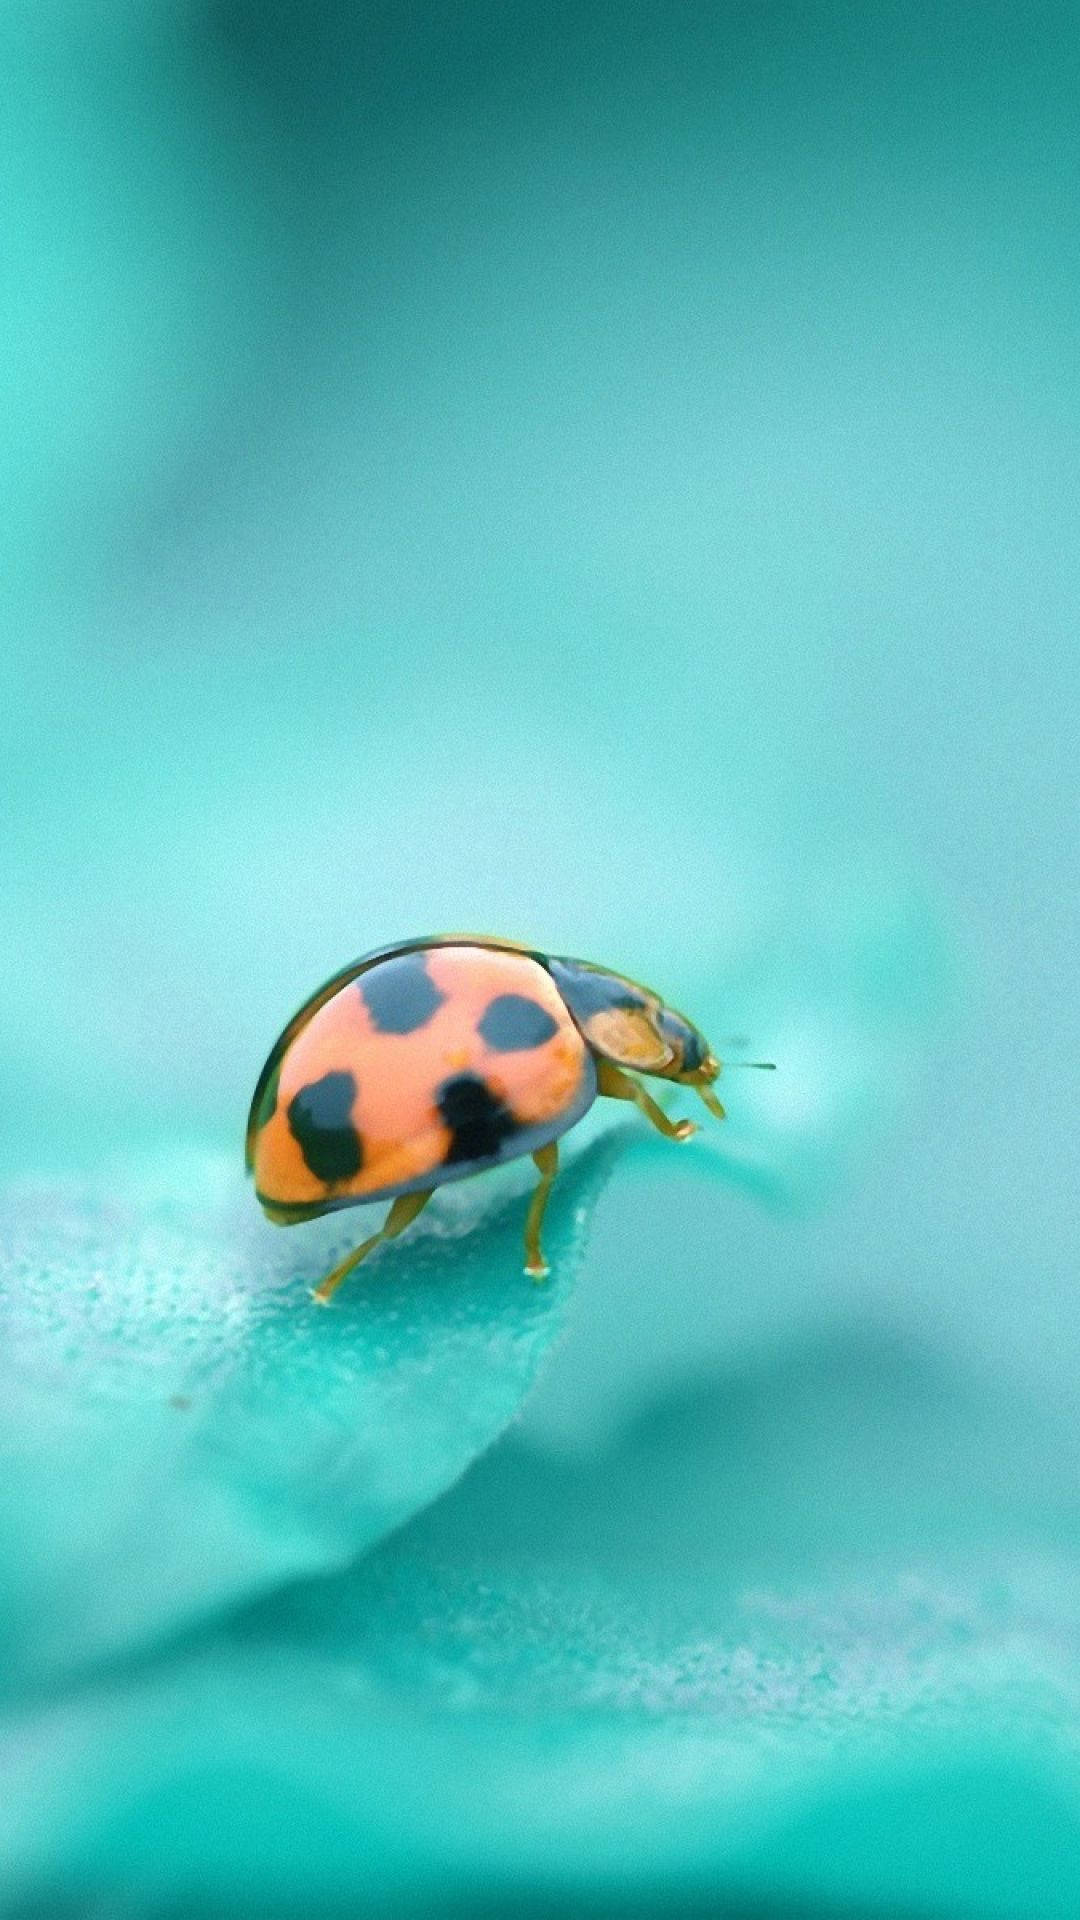 Ladybug With Red Dome-shaped Body Background